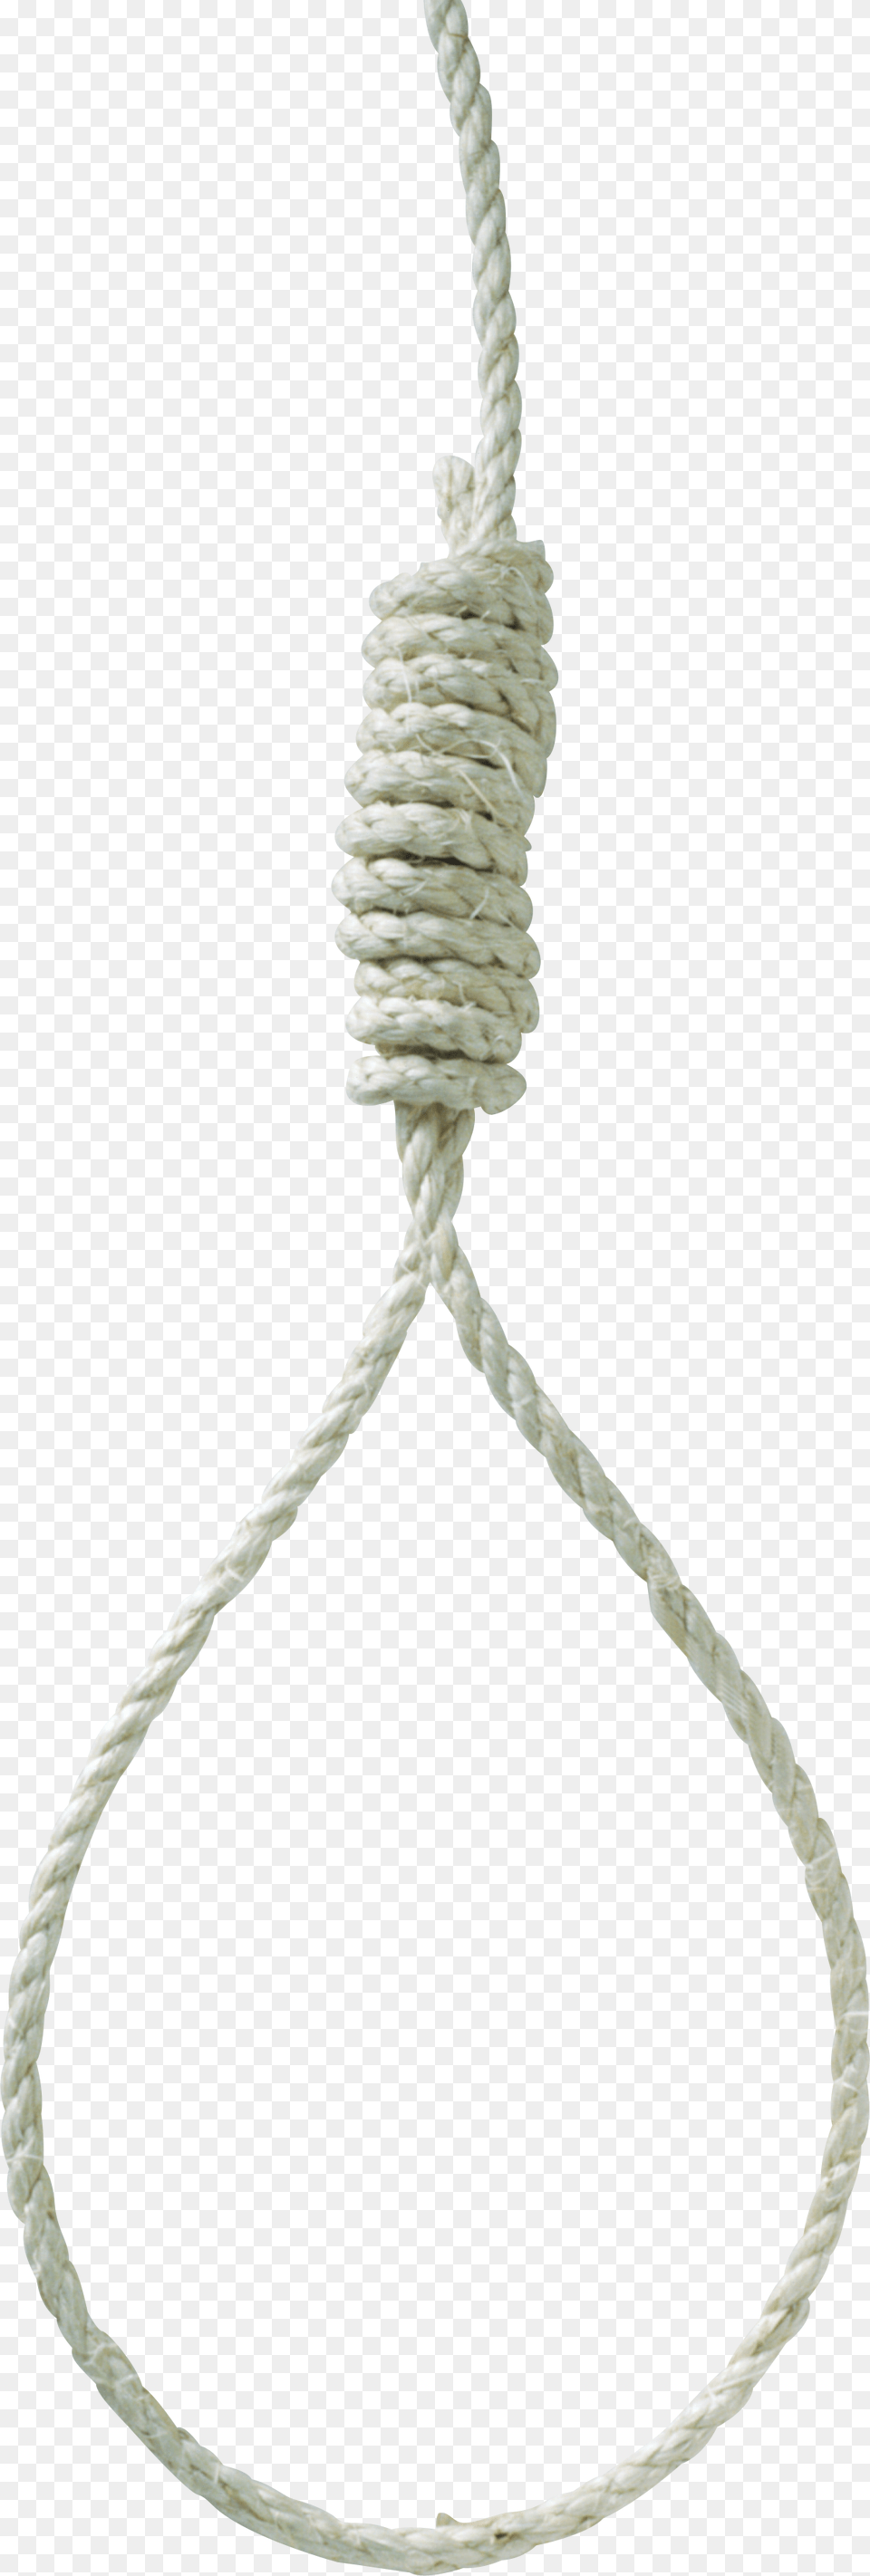 Image, Rope, Knot Png